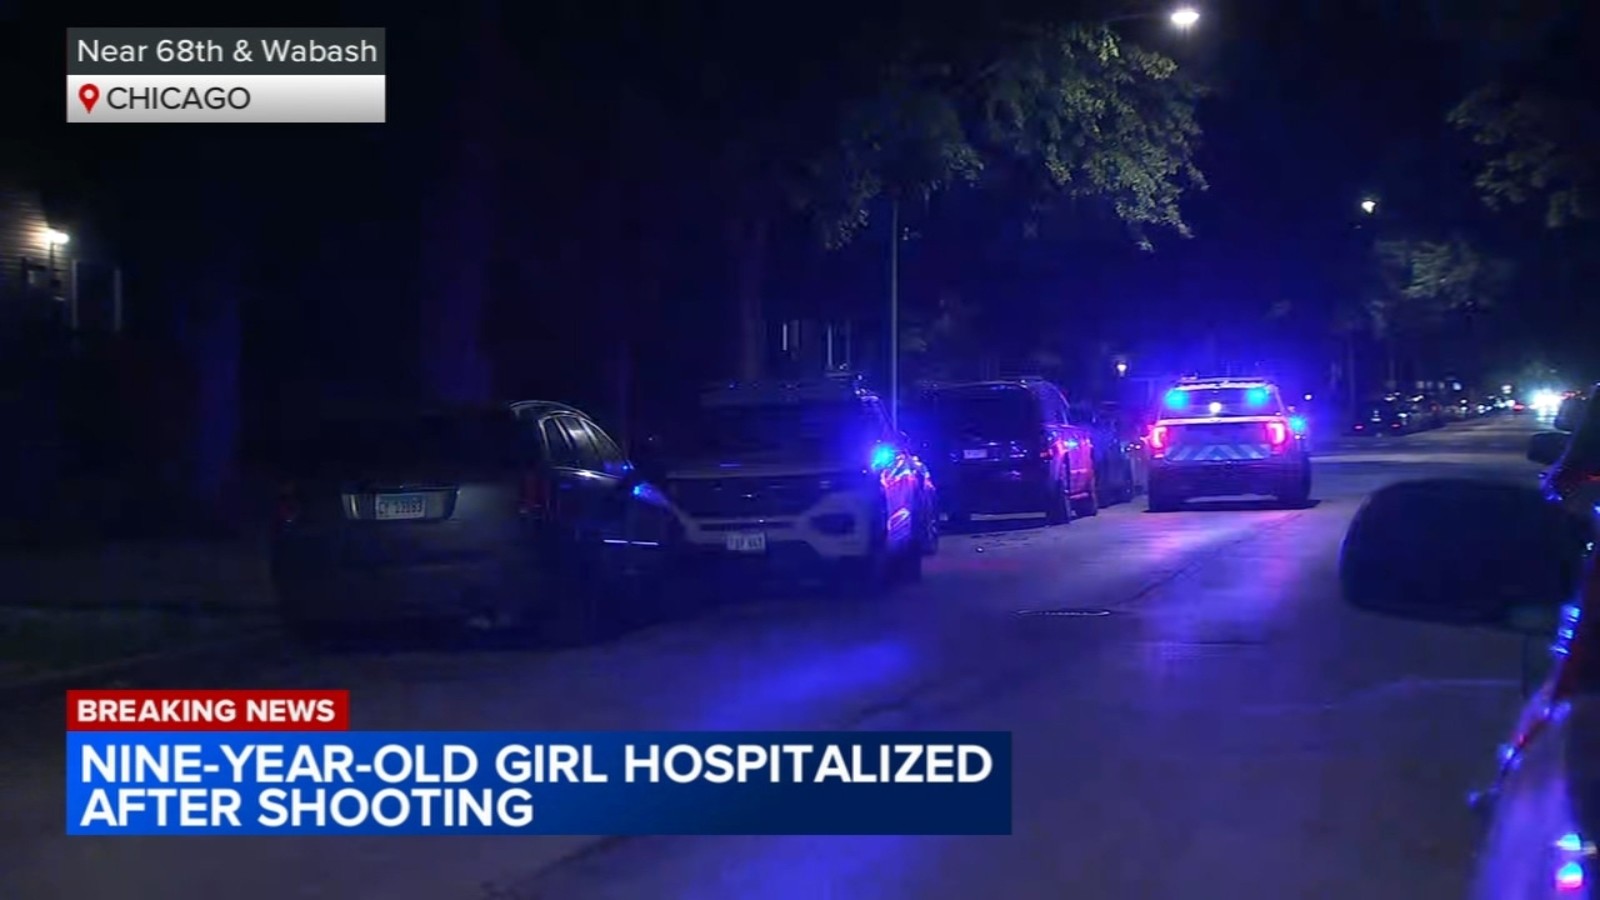 9-year-old girl accidentally shot by family member in Greater Grand Crossing, Chicago police say